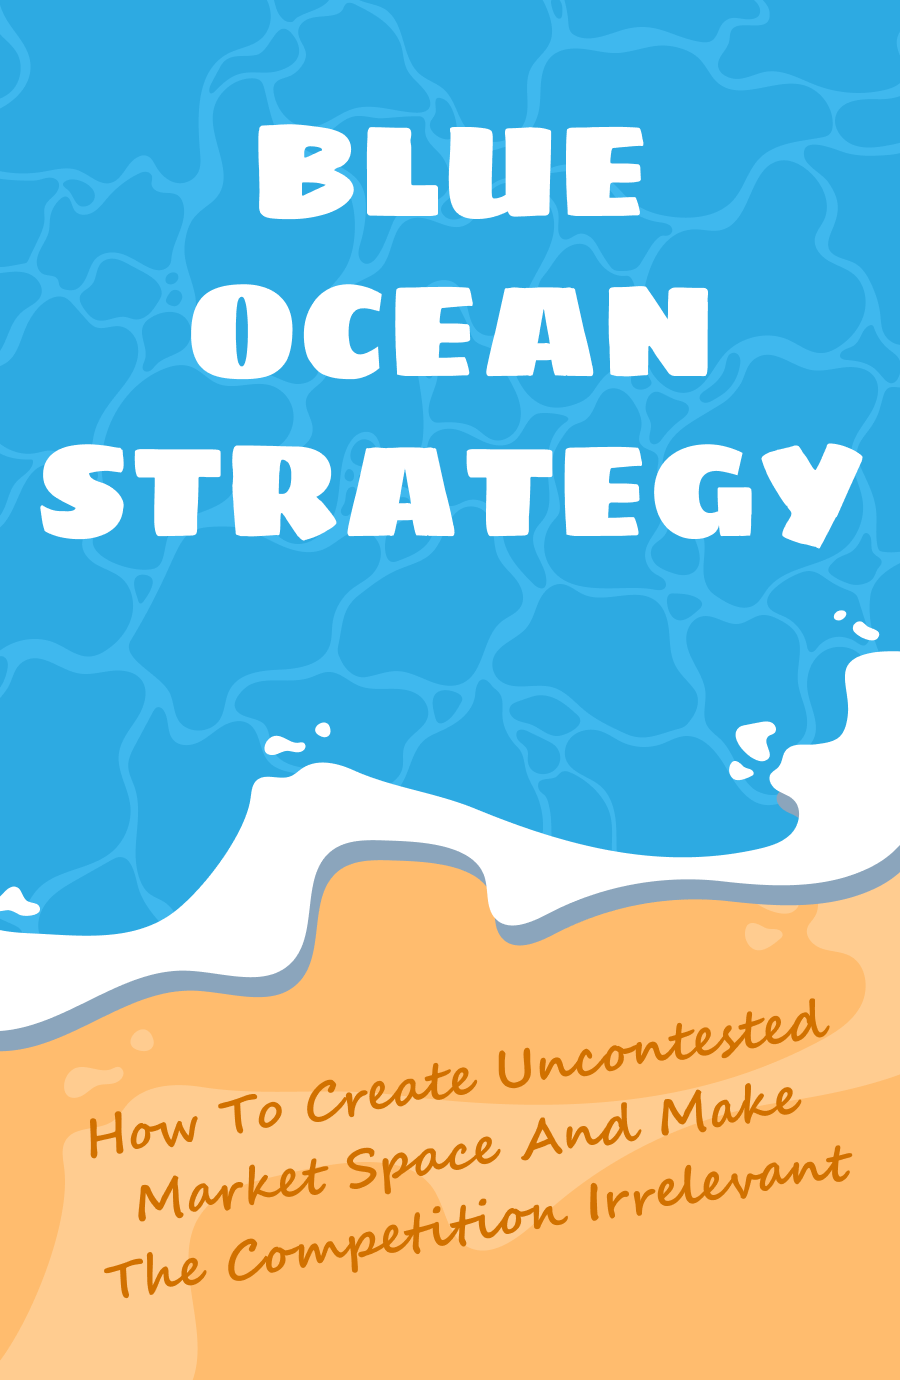 Blue Ocean Strategy Book Cover